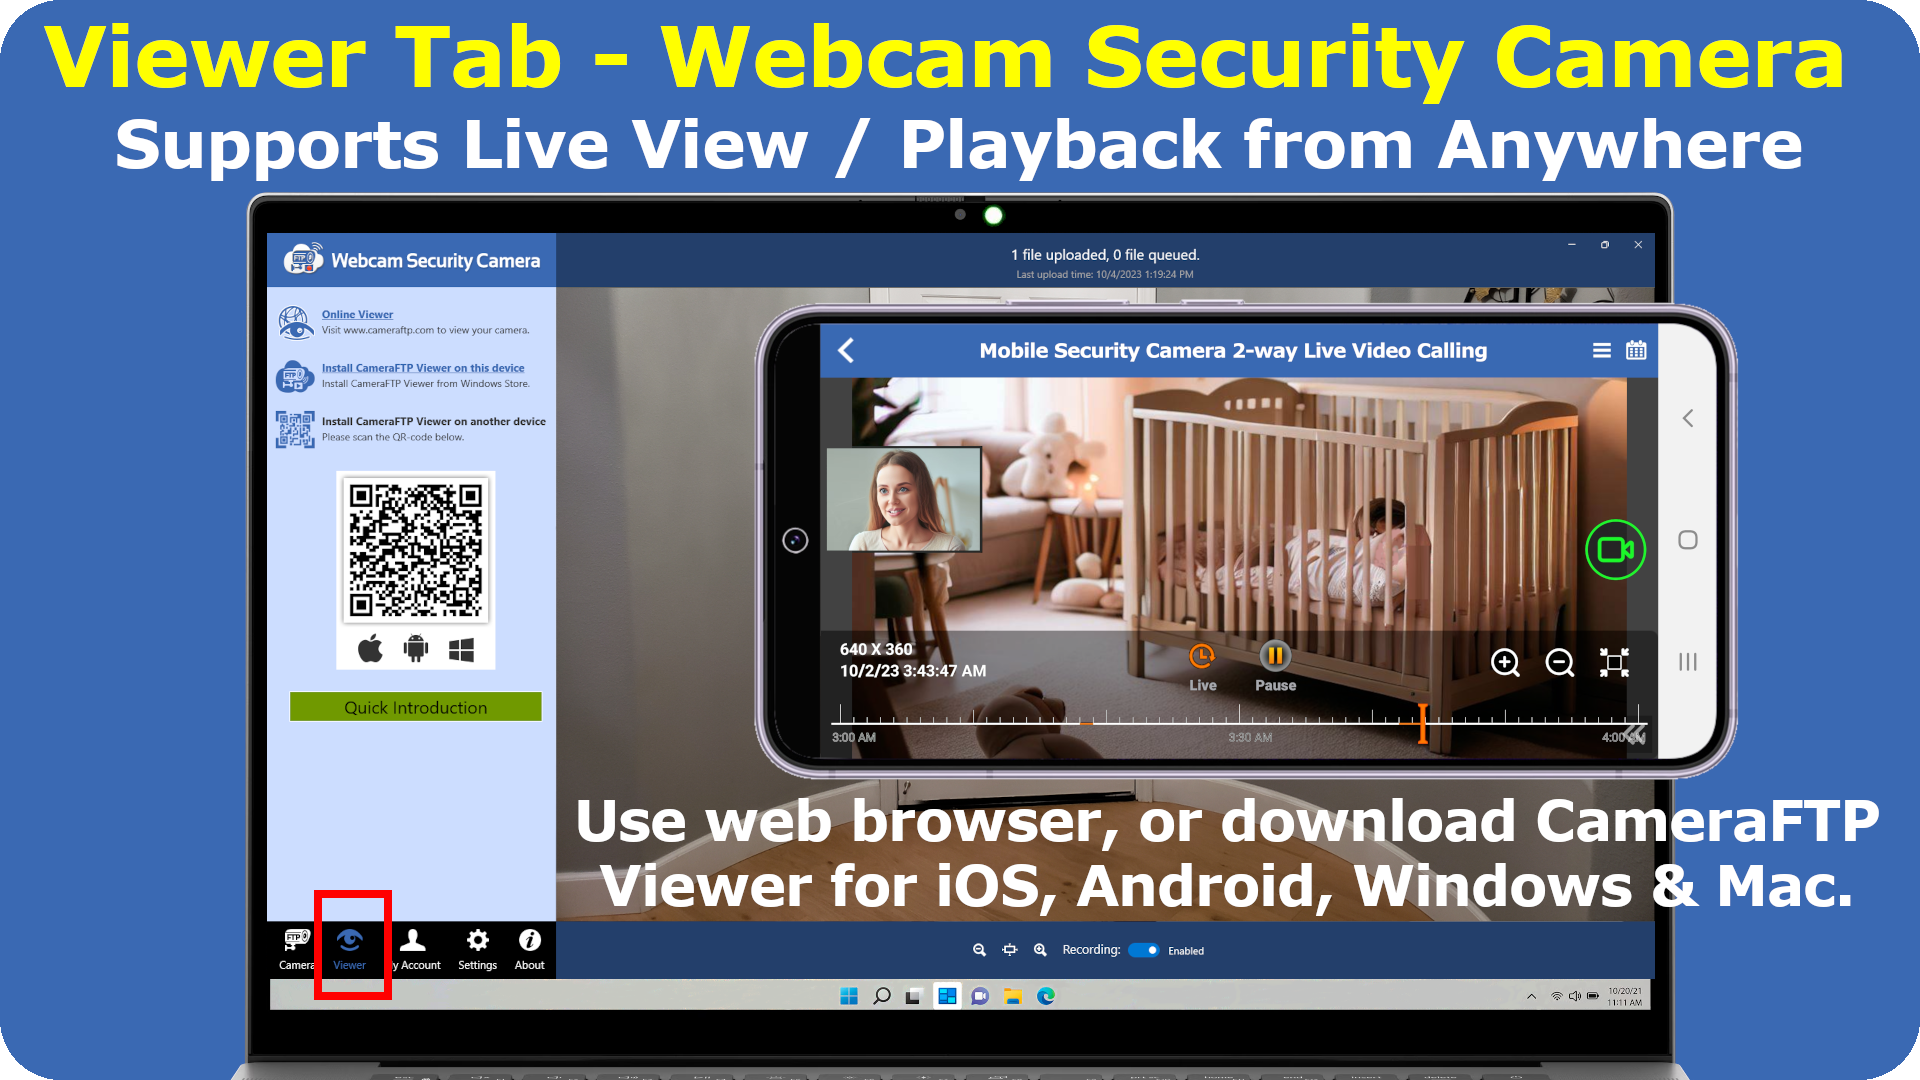 Webcam Security Camera Viewer tab. Supports live view and 2-way video & audio call. You can use web browser or download CameraFTP Viewer for iOS, Android, Windows and Mac